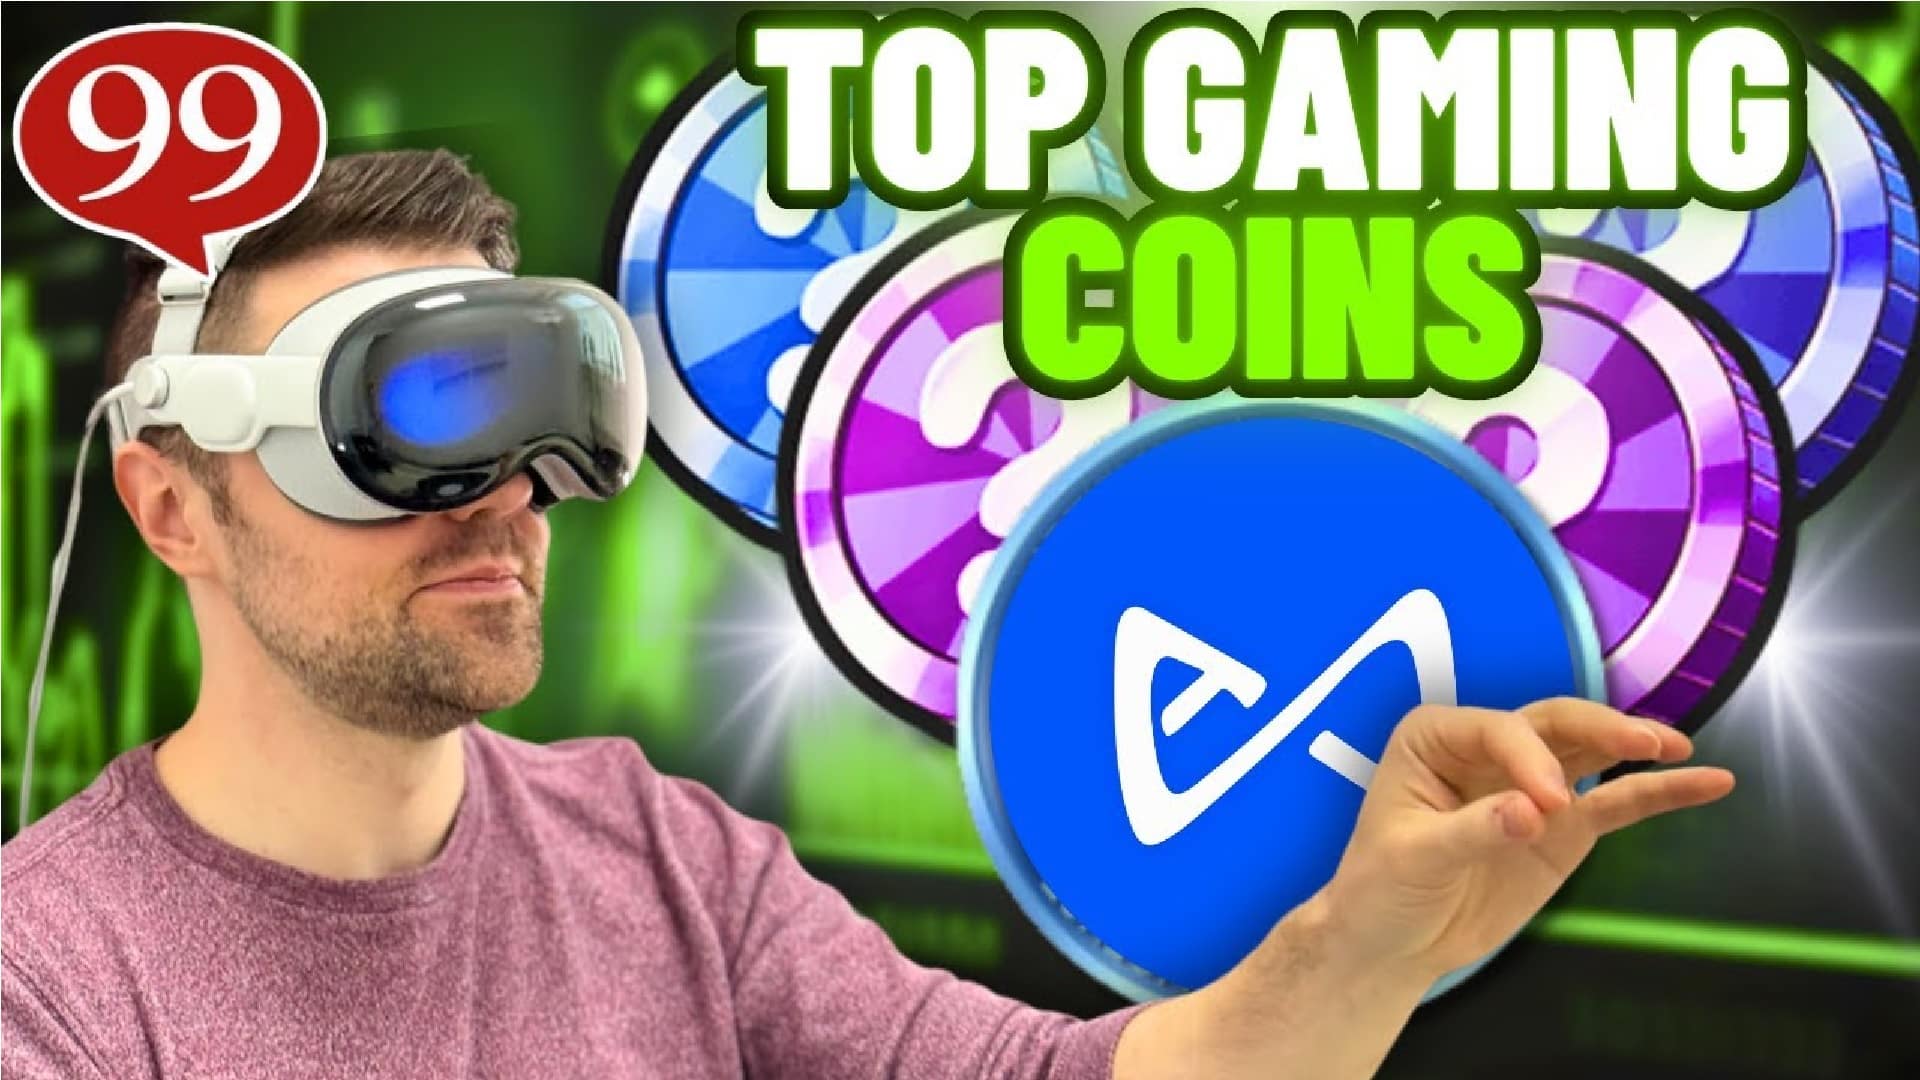 Top Gaming Coins to Buy in the Upcoming Bull Run - 99bitcoins Video Review